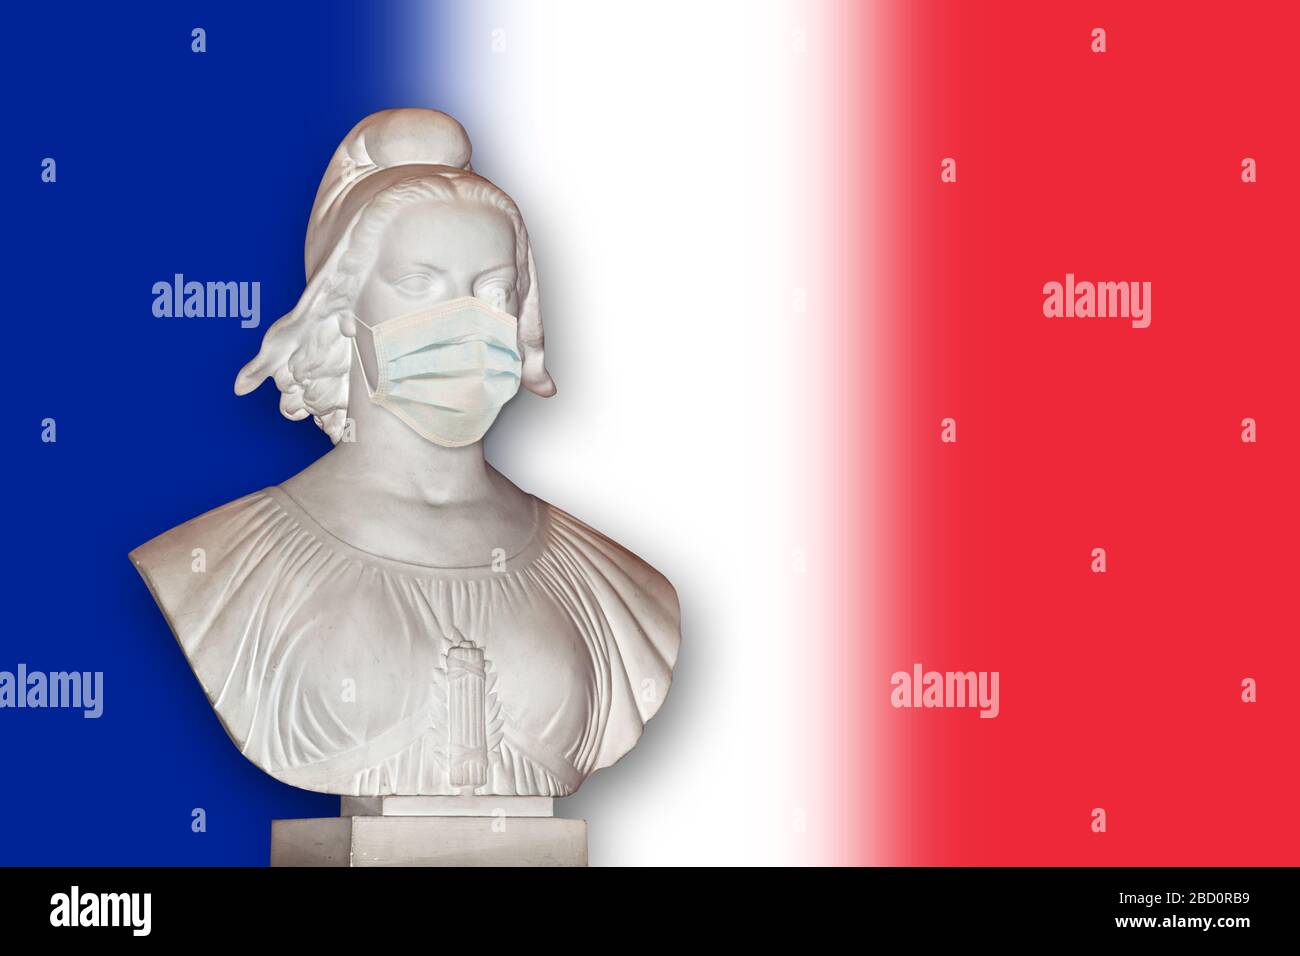 Statue of Marianne with a surgical mask, France republic symbol dealing with coronavirus covid-19 epidemic Stock Photo